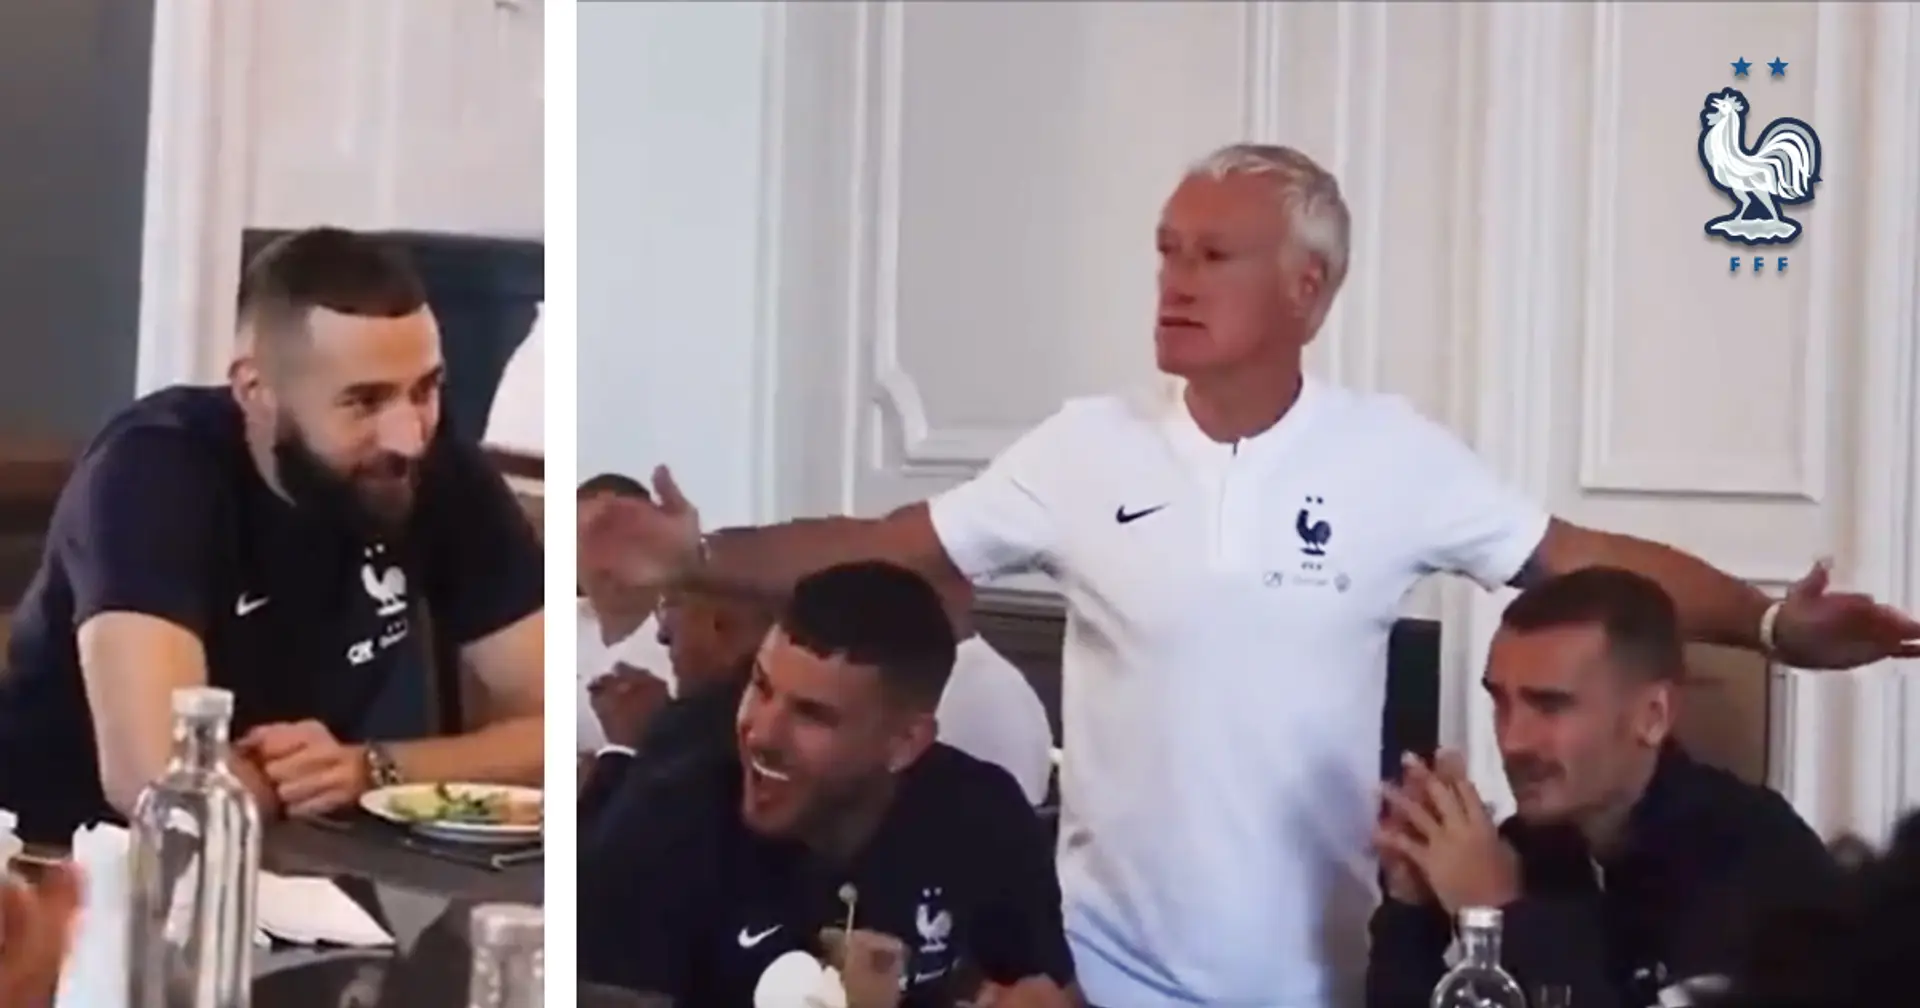 Revealed: 2 players were against Benzema return to France squad, footage even gives them away